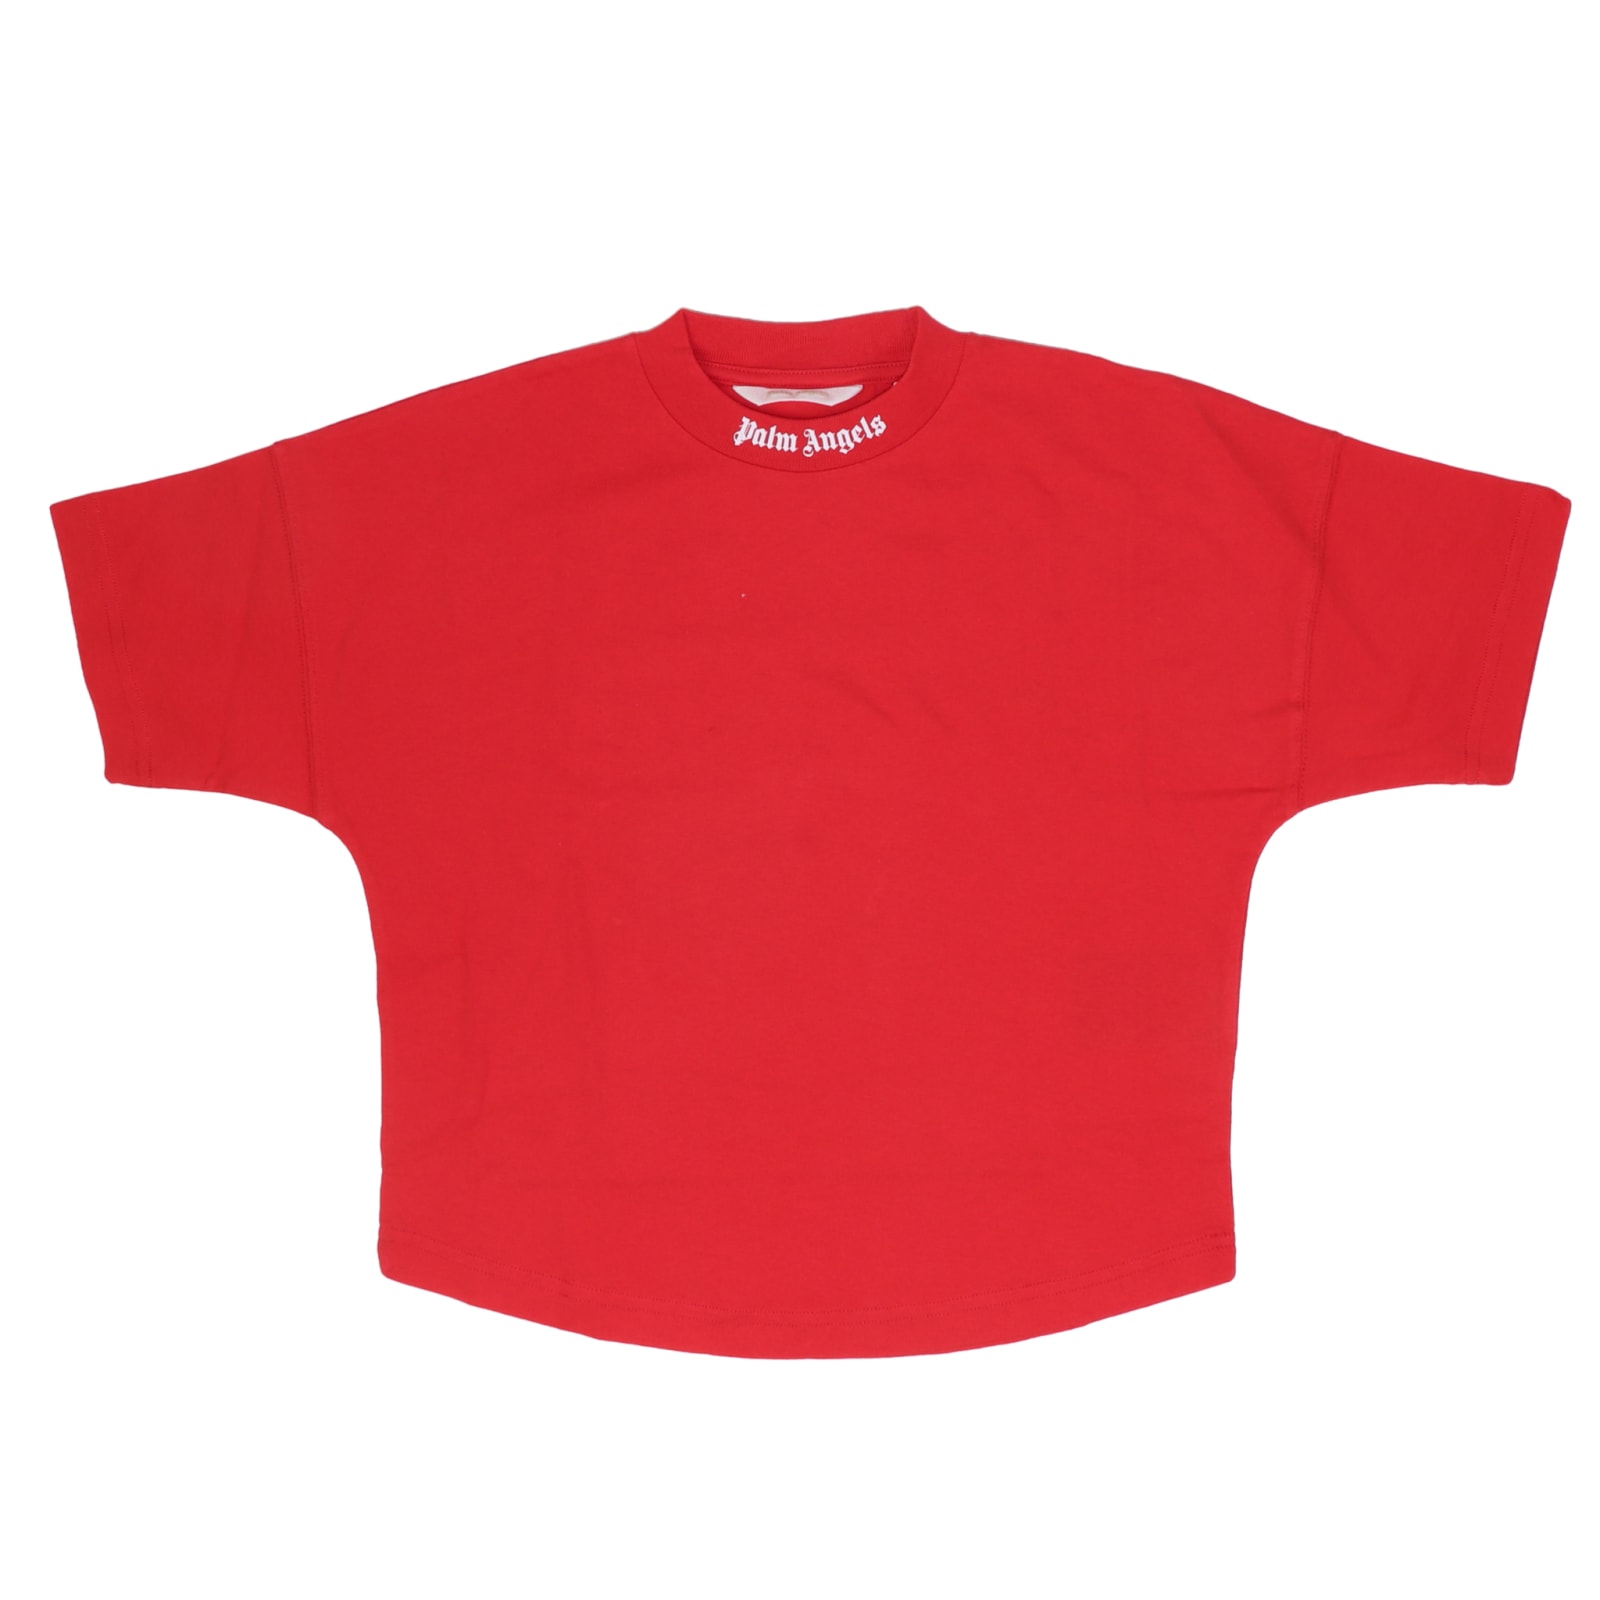 Palm Angels Kids' Cotton T-shirt In Red